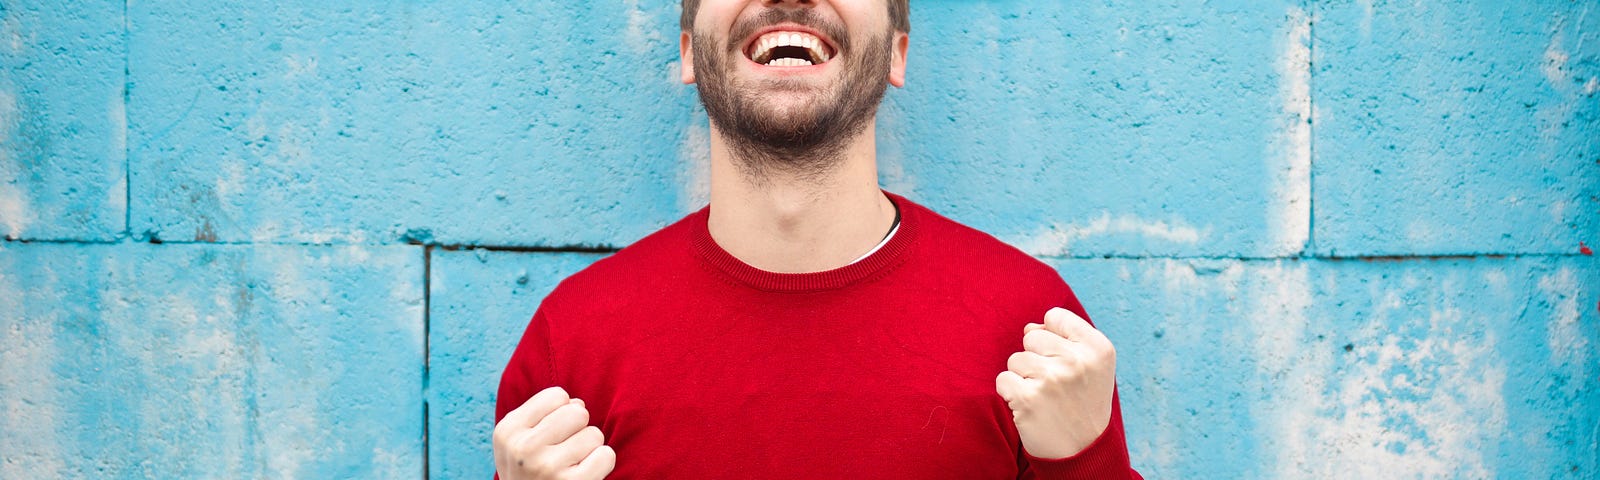 Man grinning with confidence